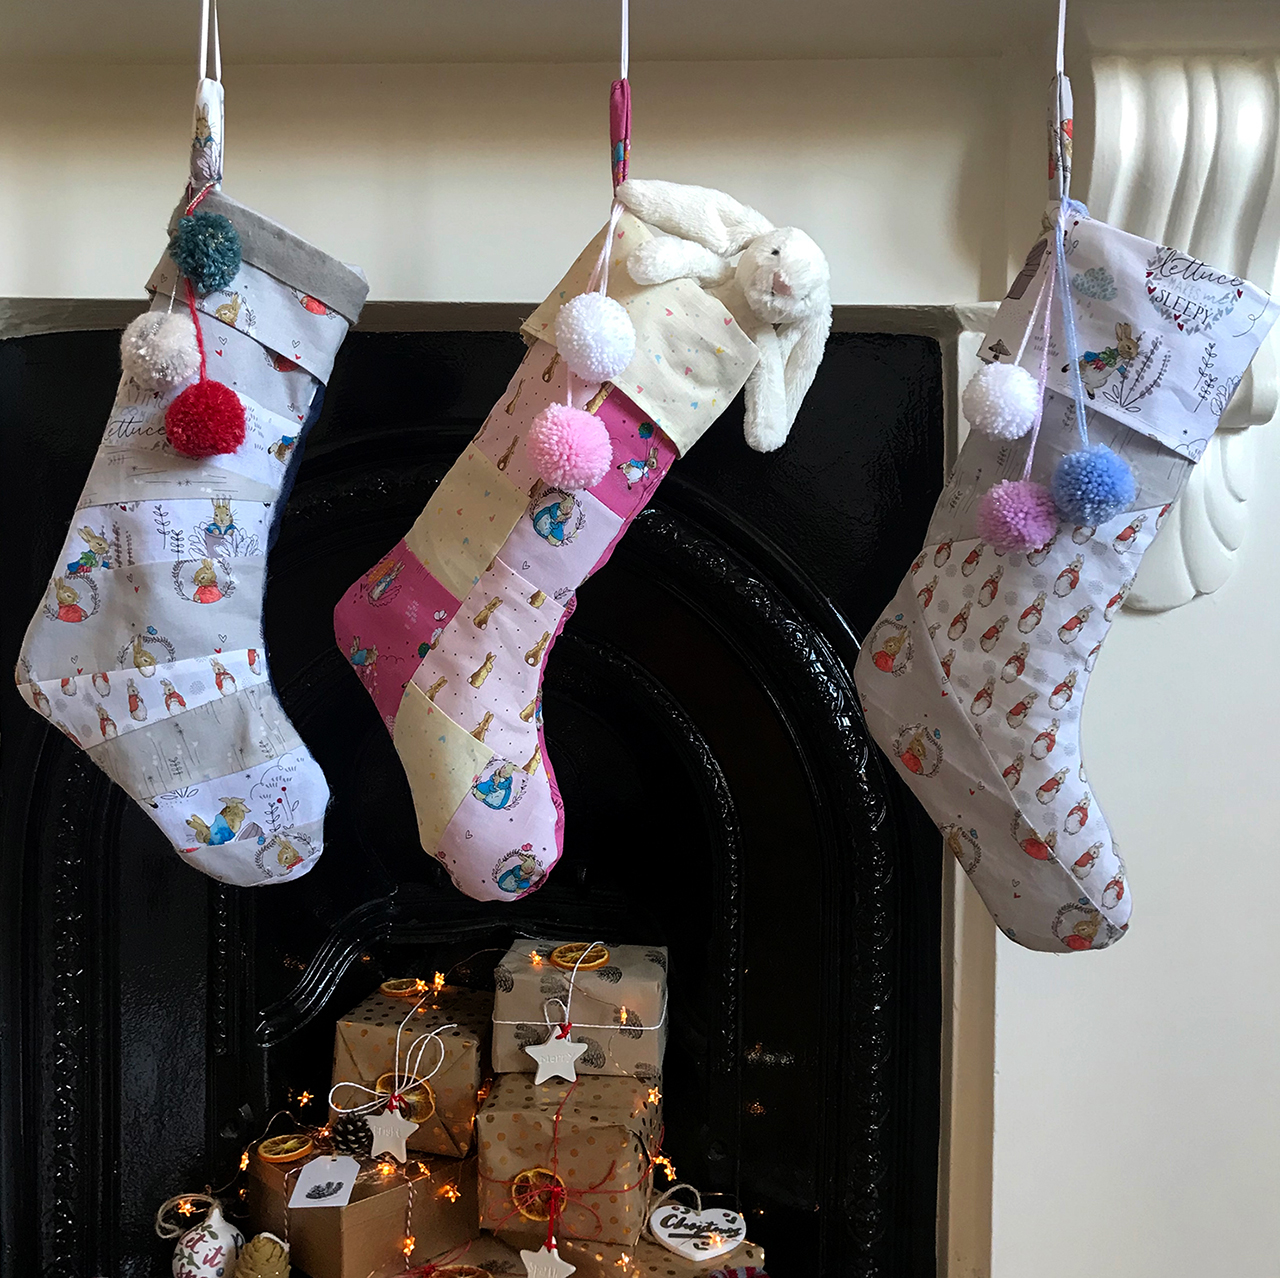 All three stockings ready for Christmas day!